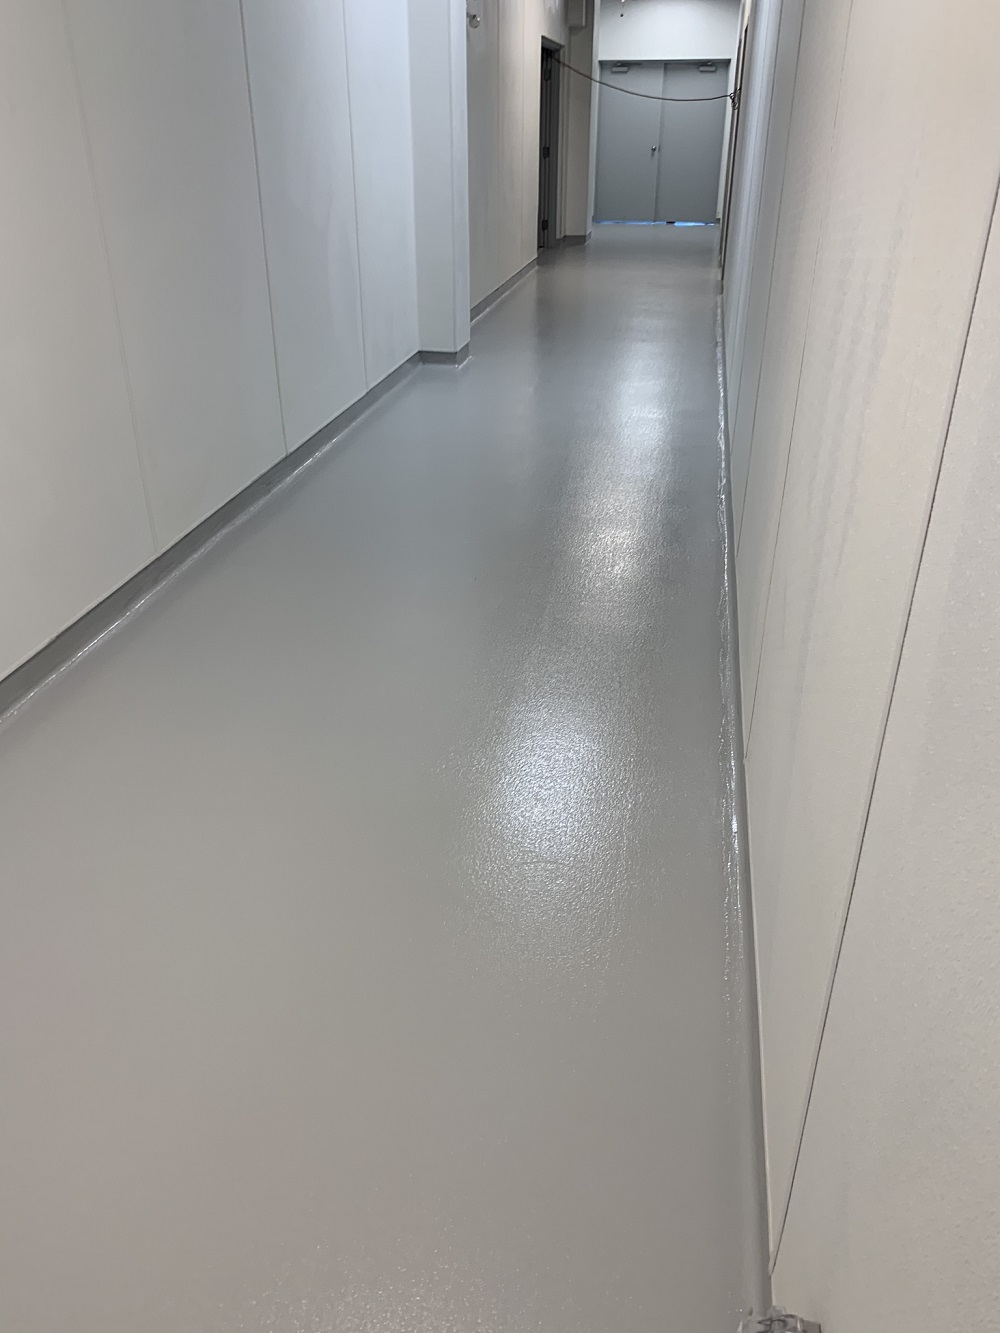 The Proper Maintenance and Cleaning Methods for Epoxy Floors - Swift Epoxy Flooring